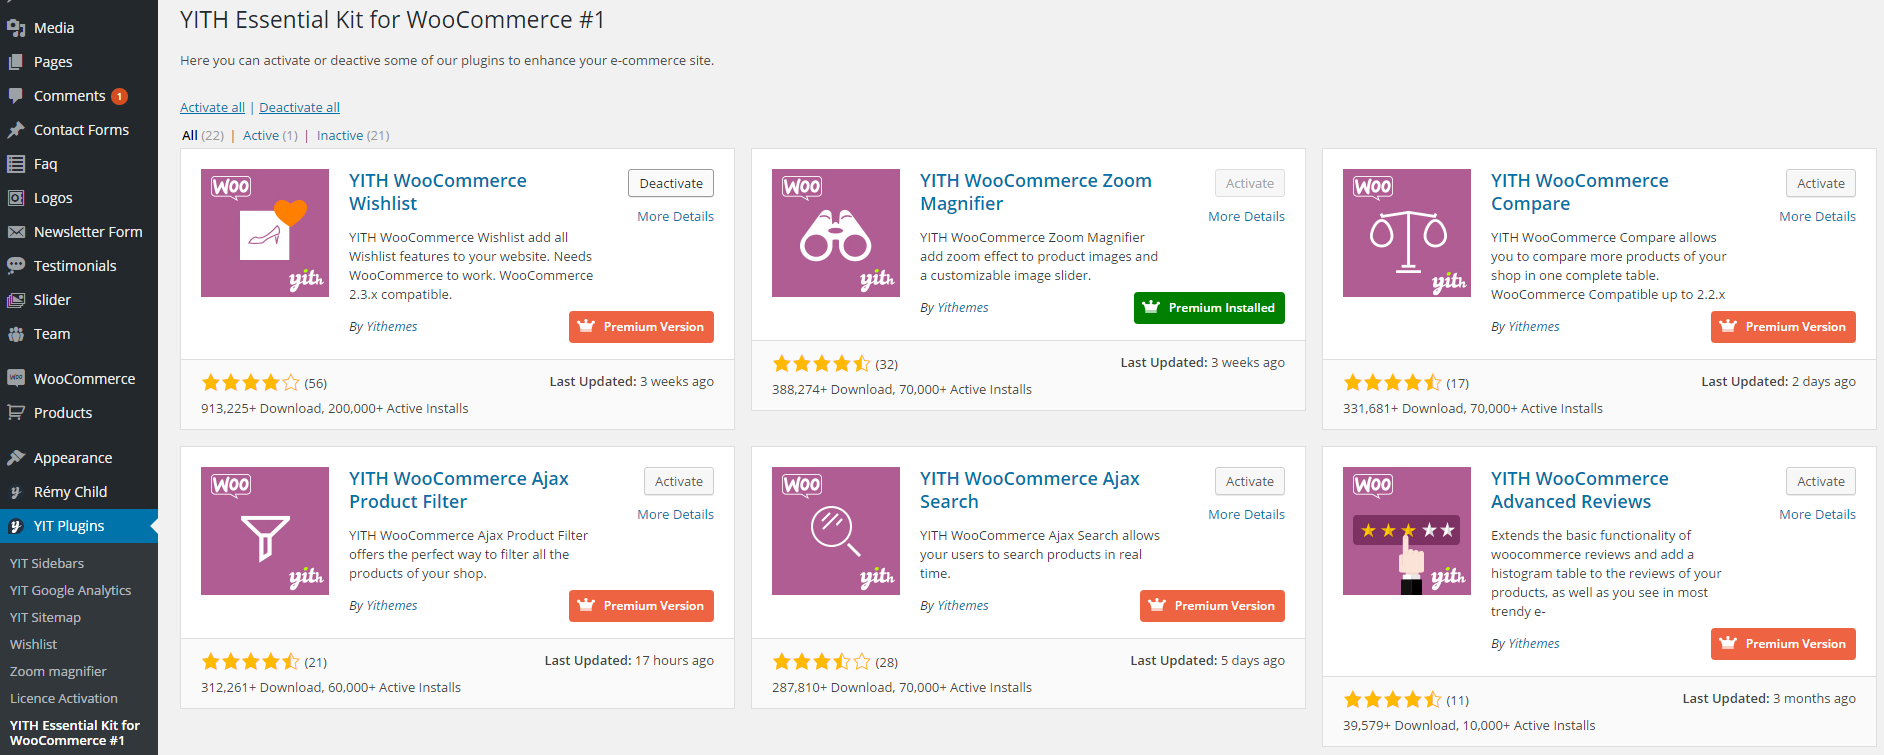 YITH Essential Kit for WooCommerce #1 Download Free Wordpress Plugin 2